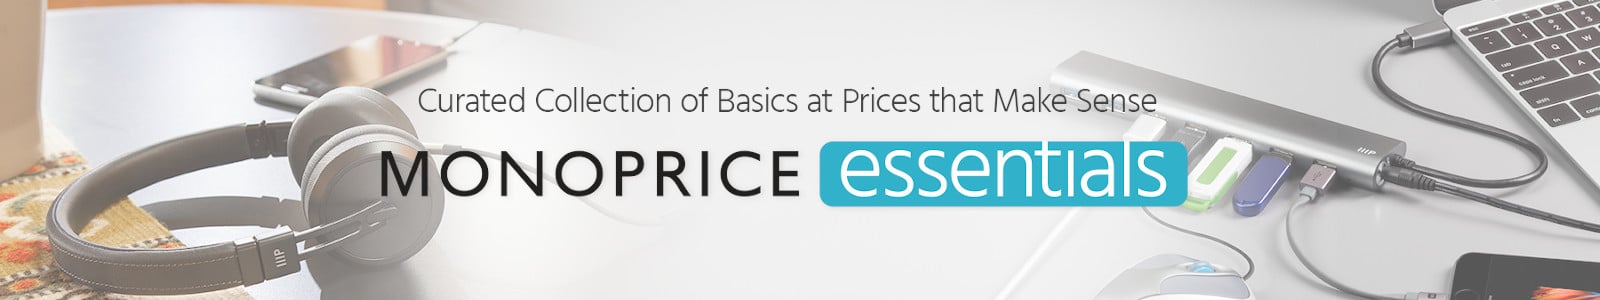 Curated Collection of Basics at Prices that Make Sense, Monoprice Essentials